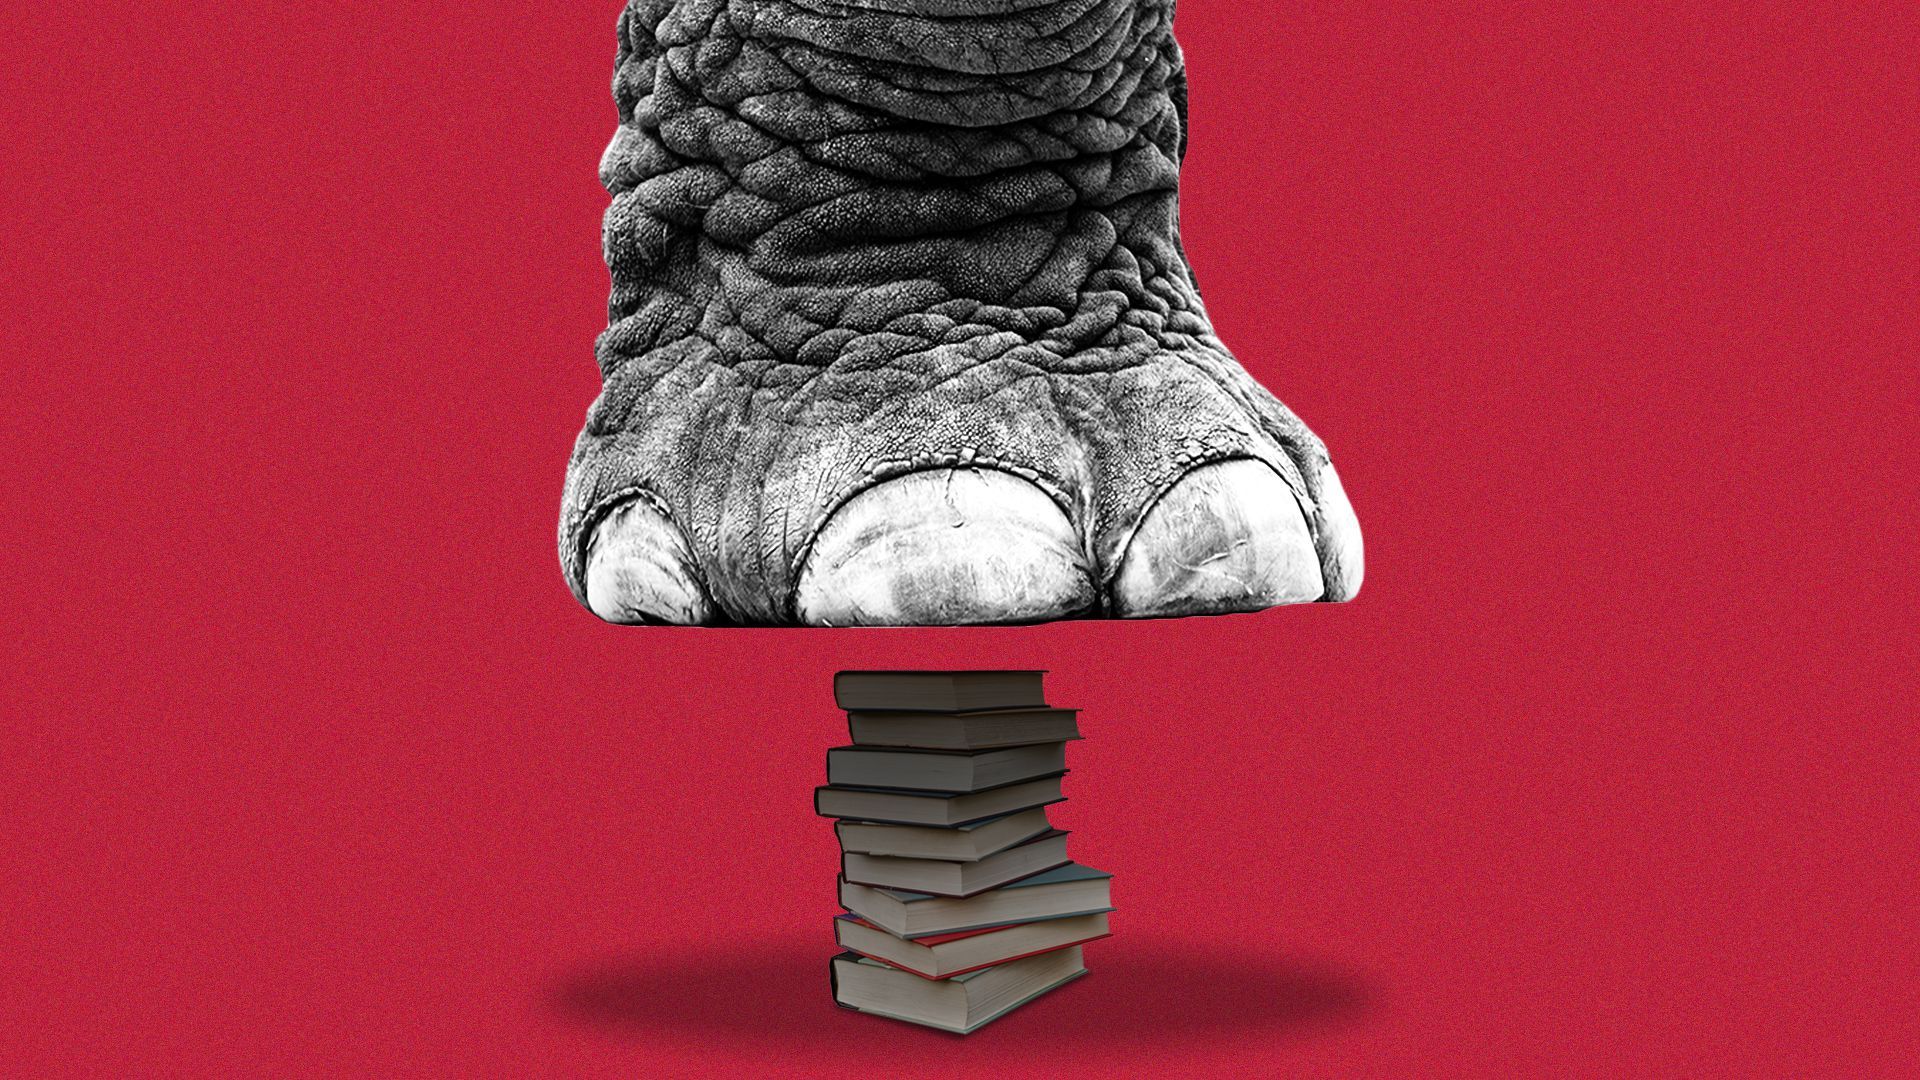 Illustration of an elephant leg looming over a stack of books.